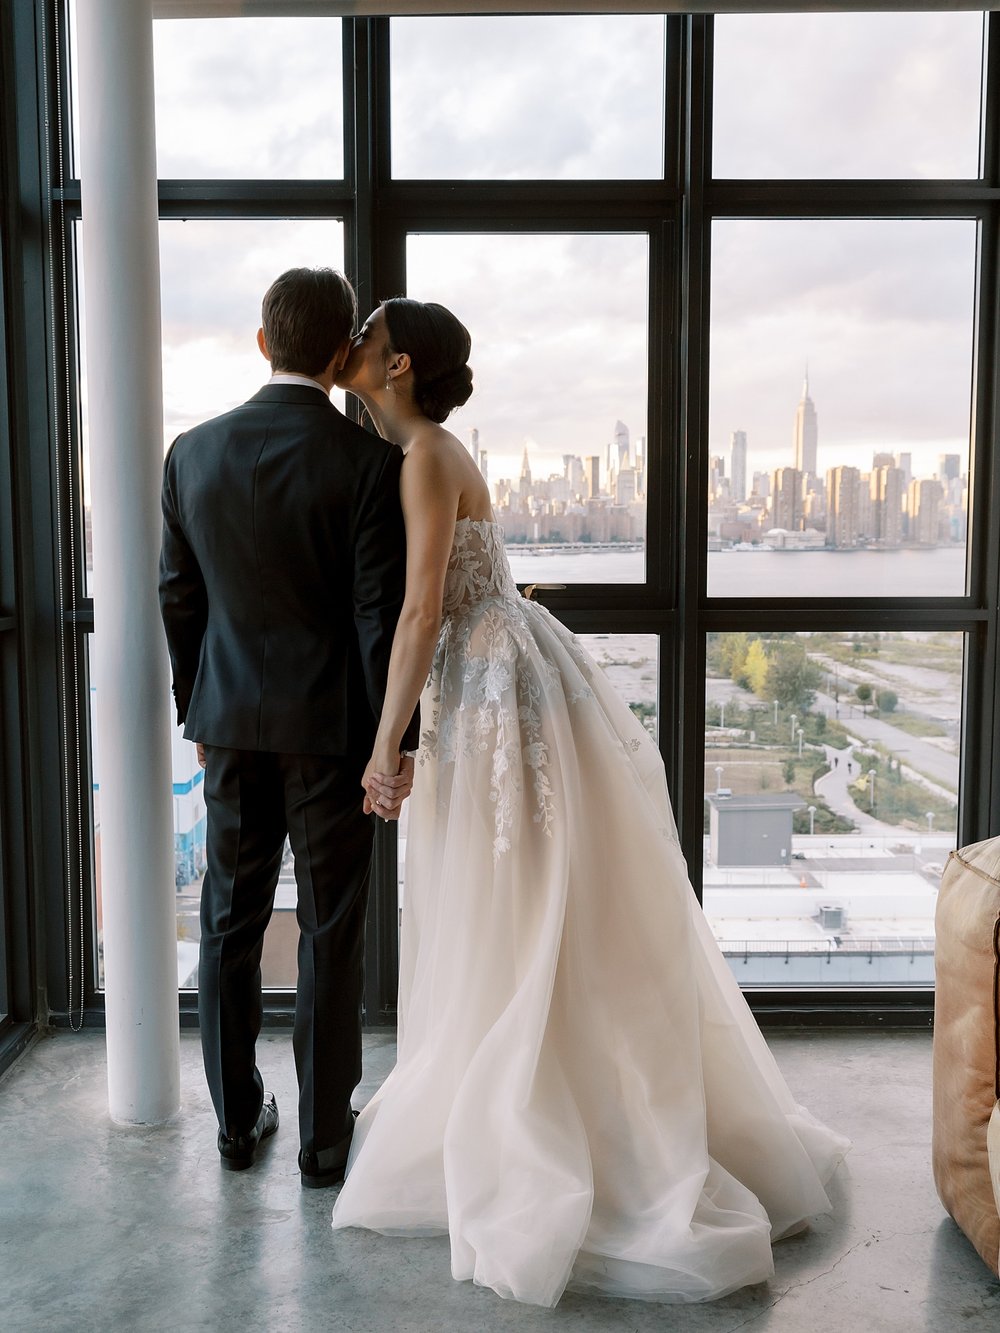 bride leans to kiss groom's cheek in front of large windows overlooking Brooklyn